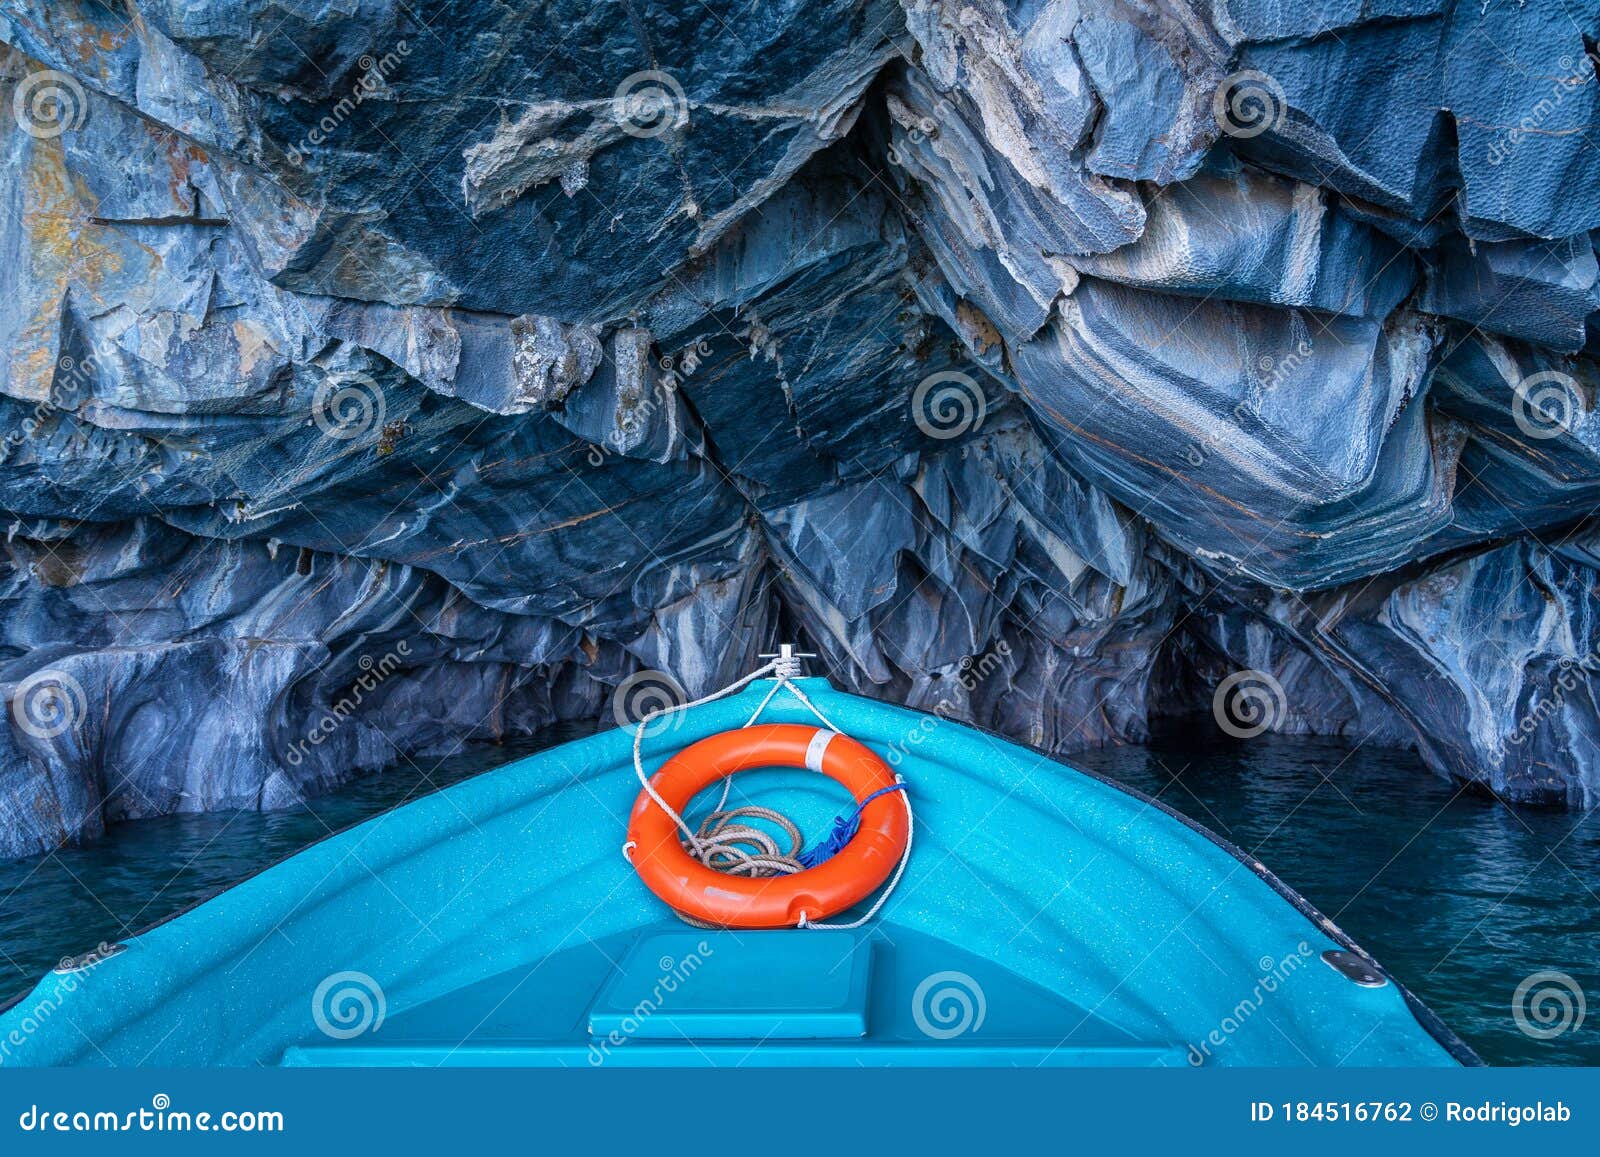 tour boat exploring the marble caves in the general carrera lake, chilean patagonia, south america